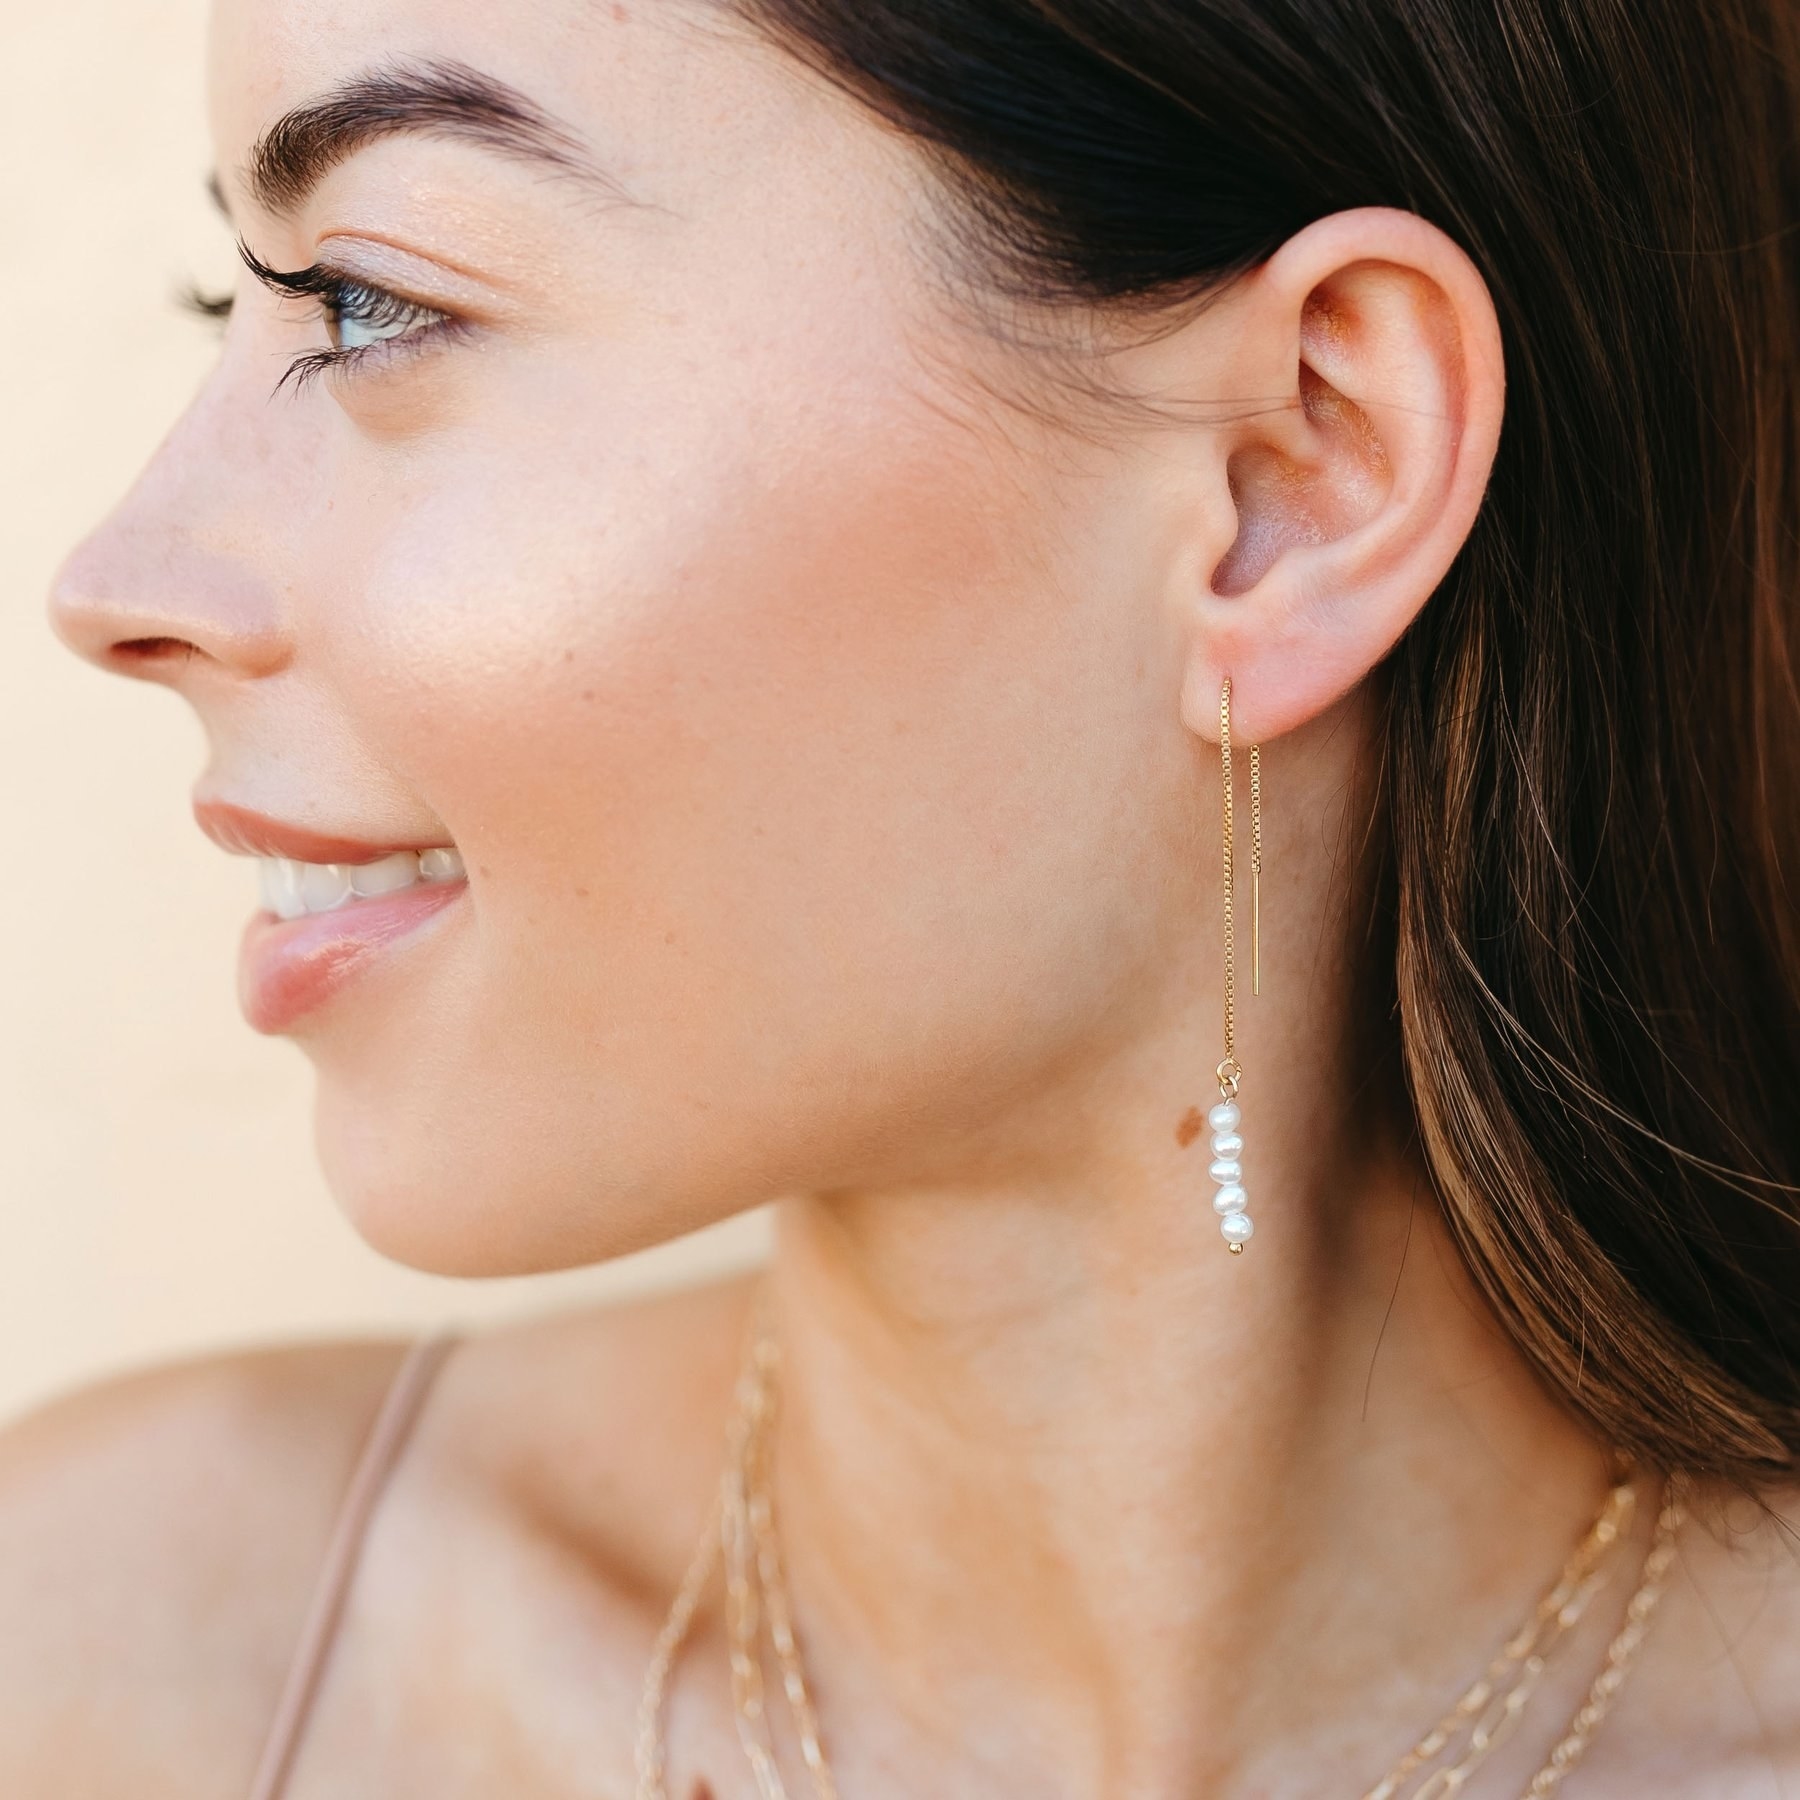 model wearing the threaded earrings with pearls at the end